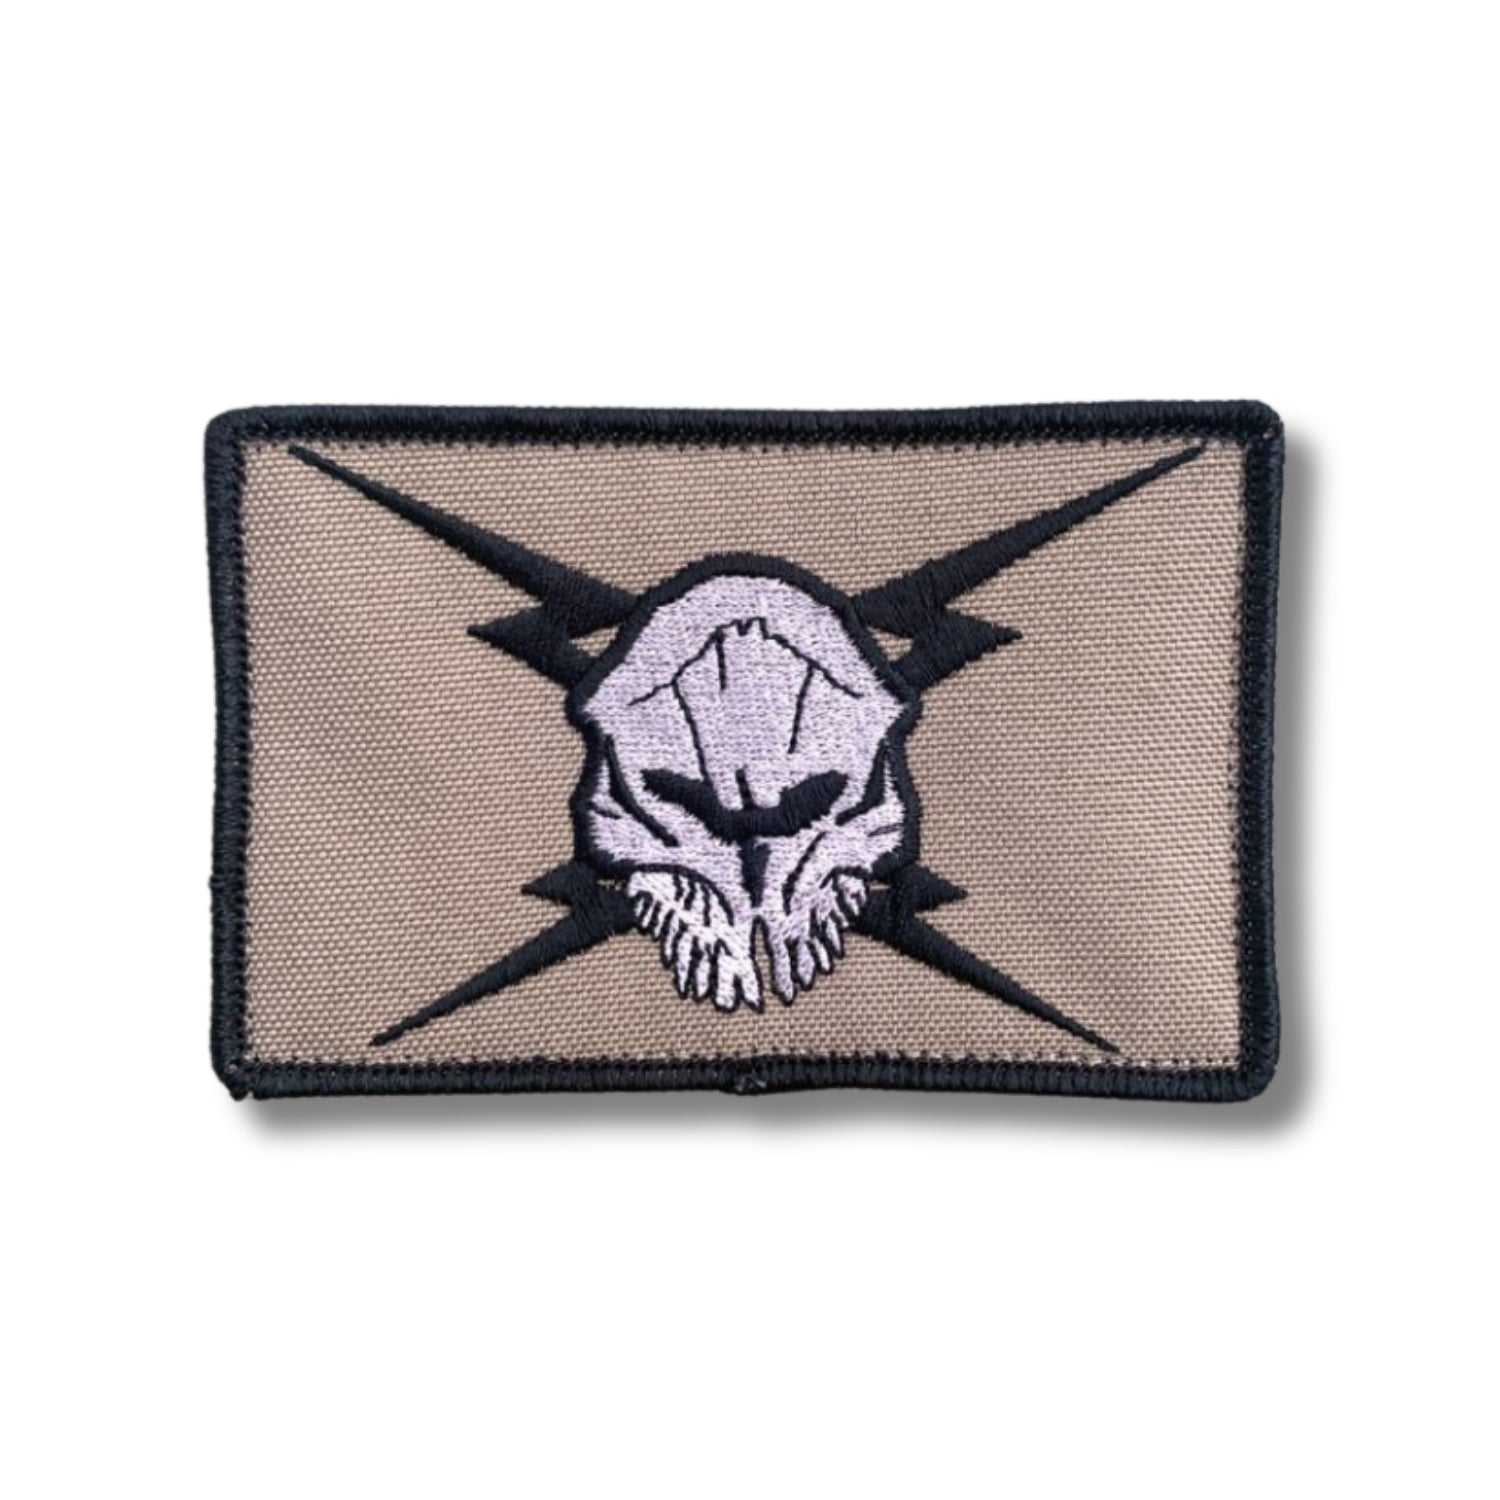 Kill Team Victory Patch